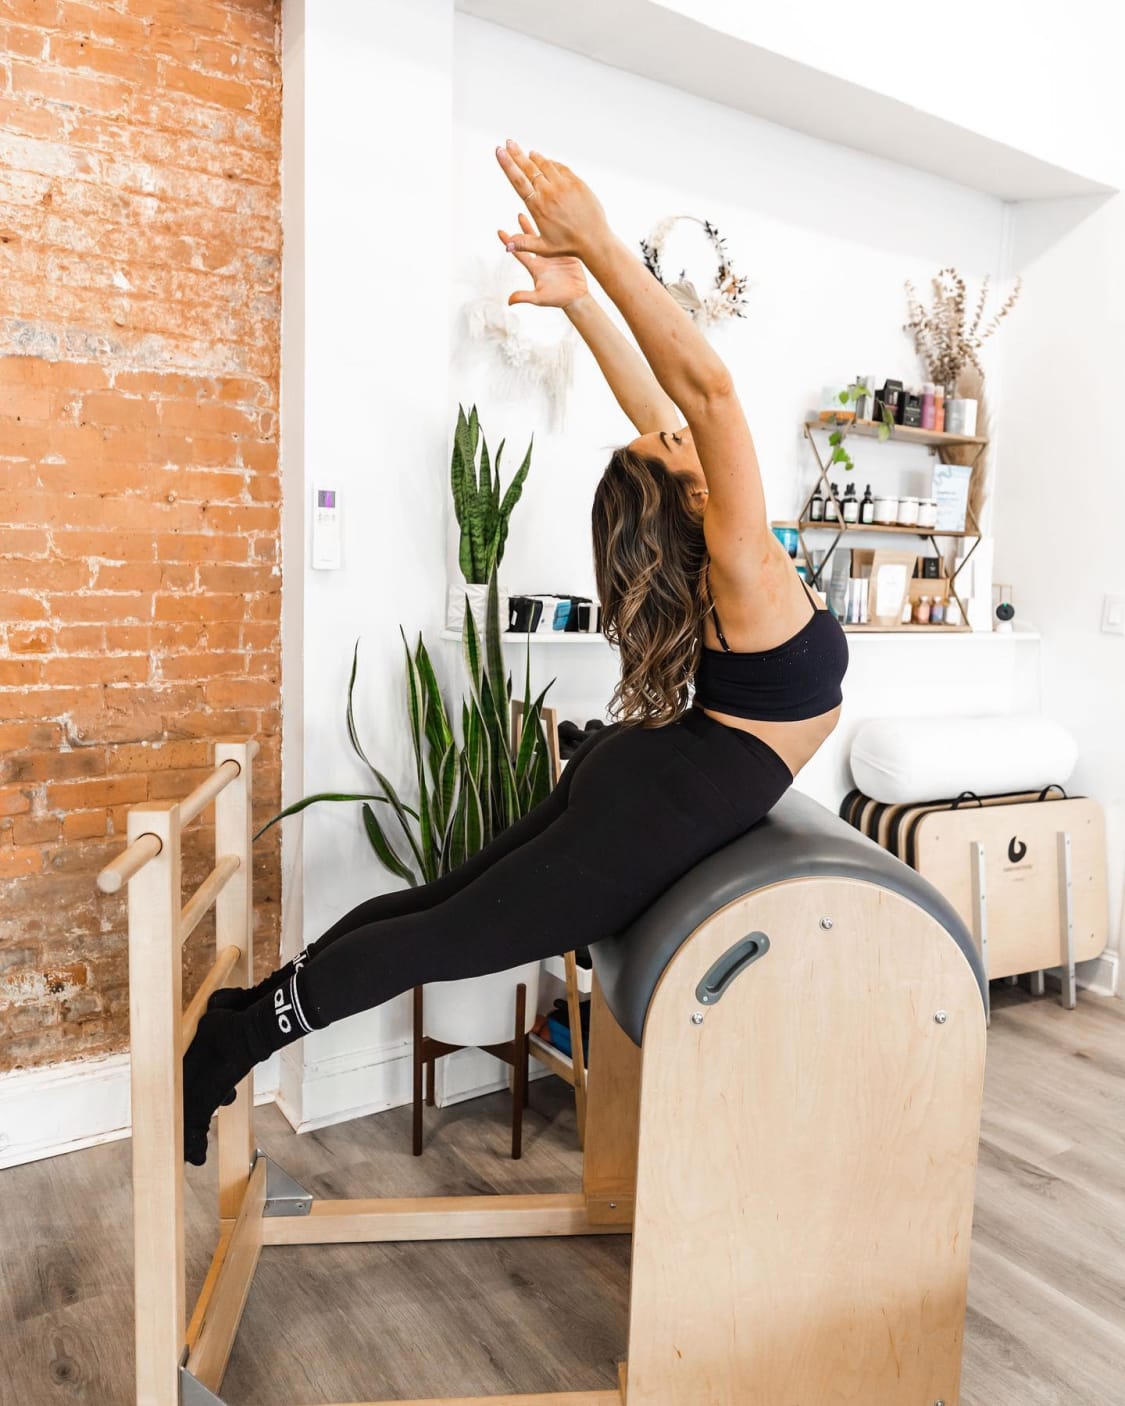 Body by Simone - Chelsea: Read Reviews and Book Classes on ClassPass